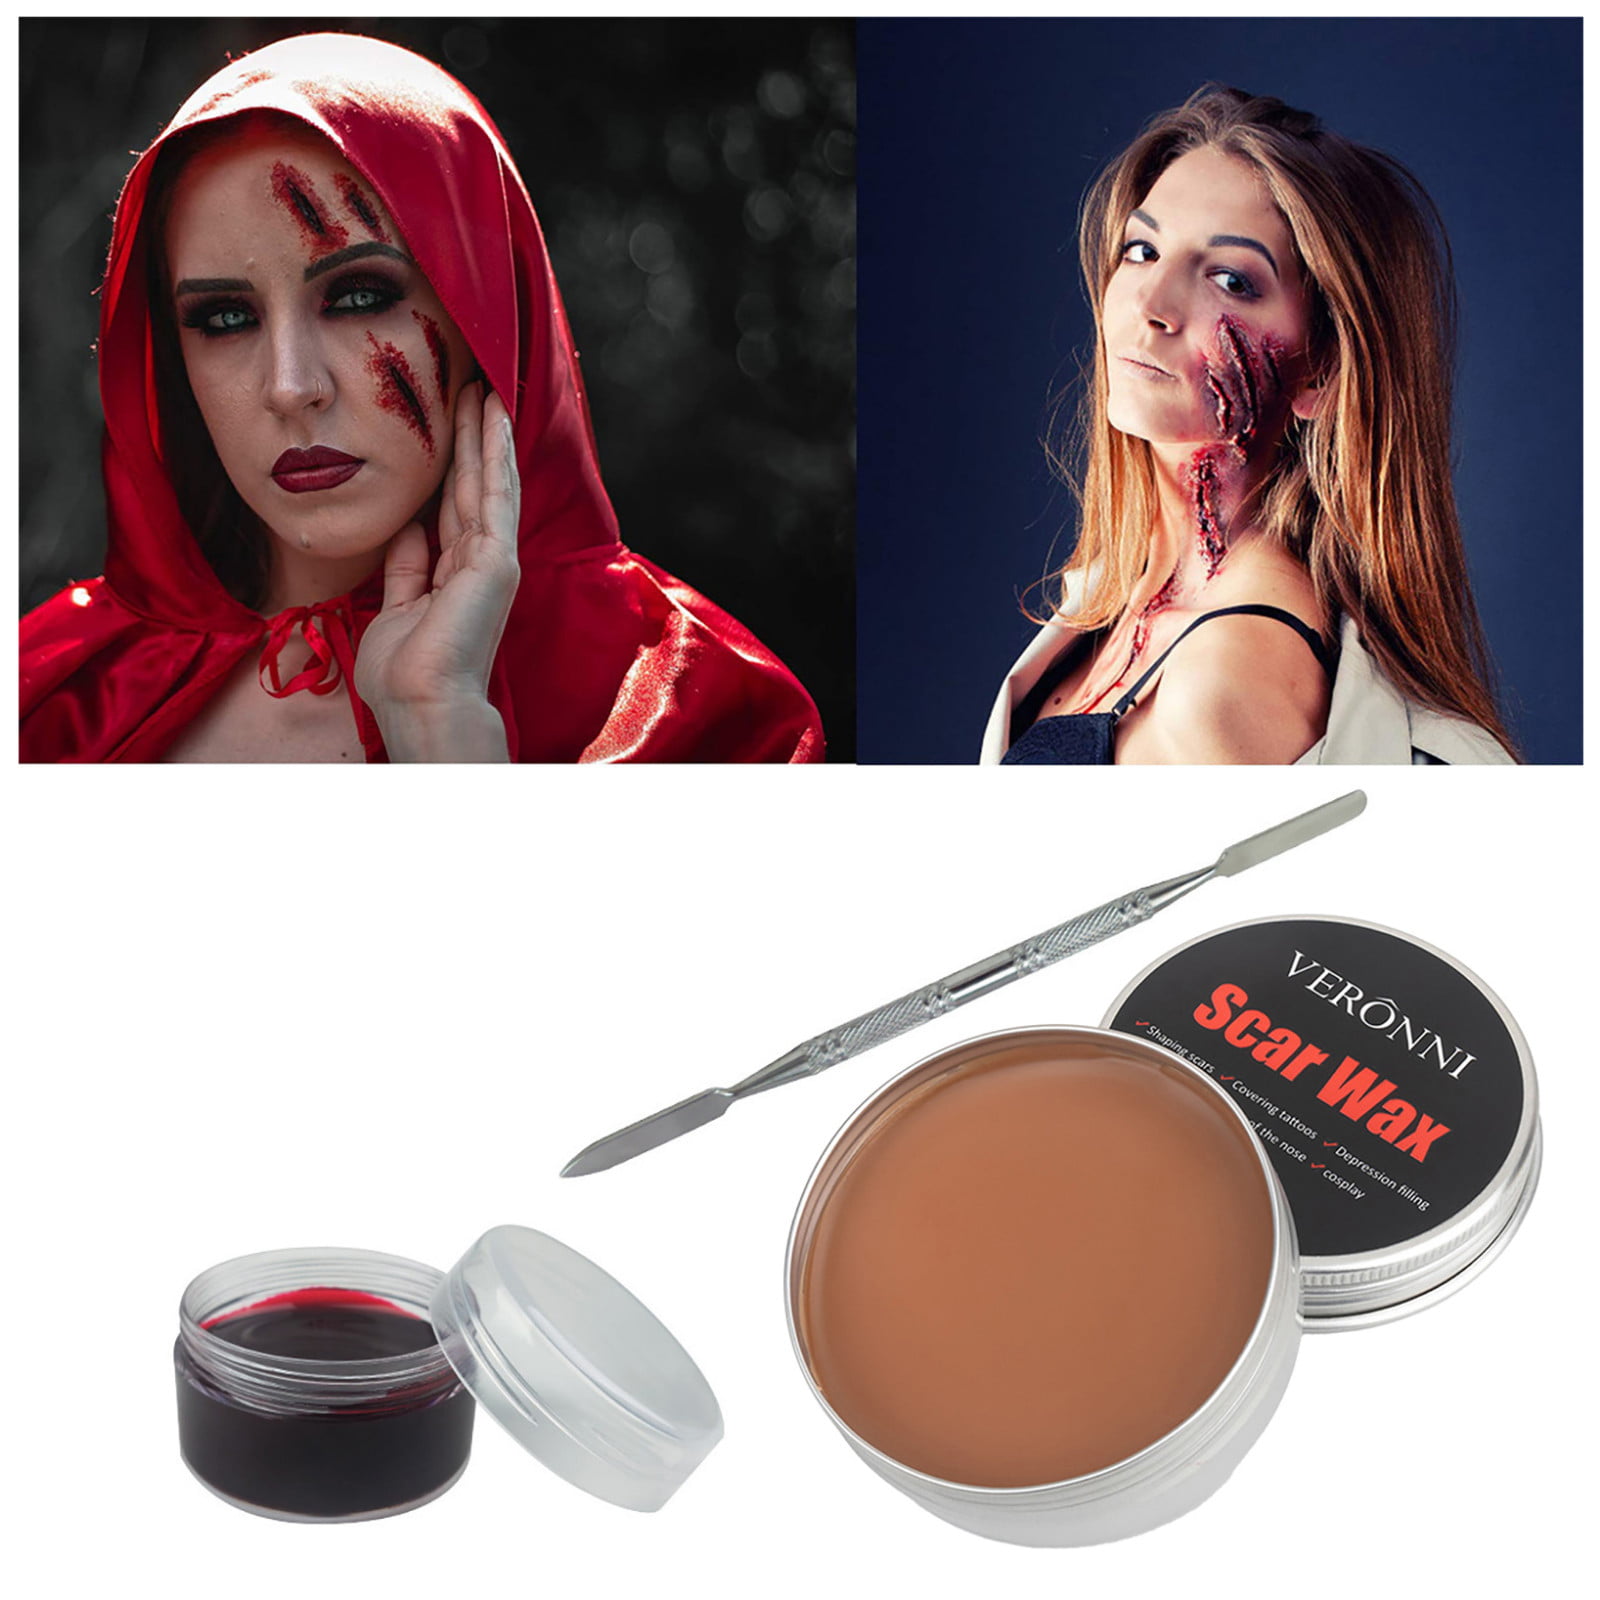 Hallowmas Makeup For Effects Fake Scar Skin Body Painting Waxset20ml -